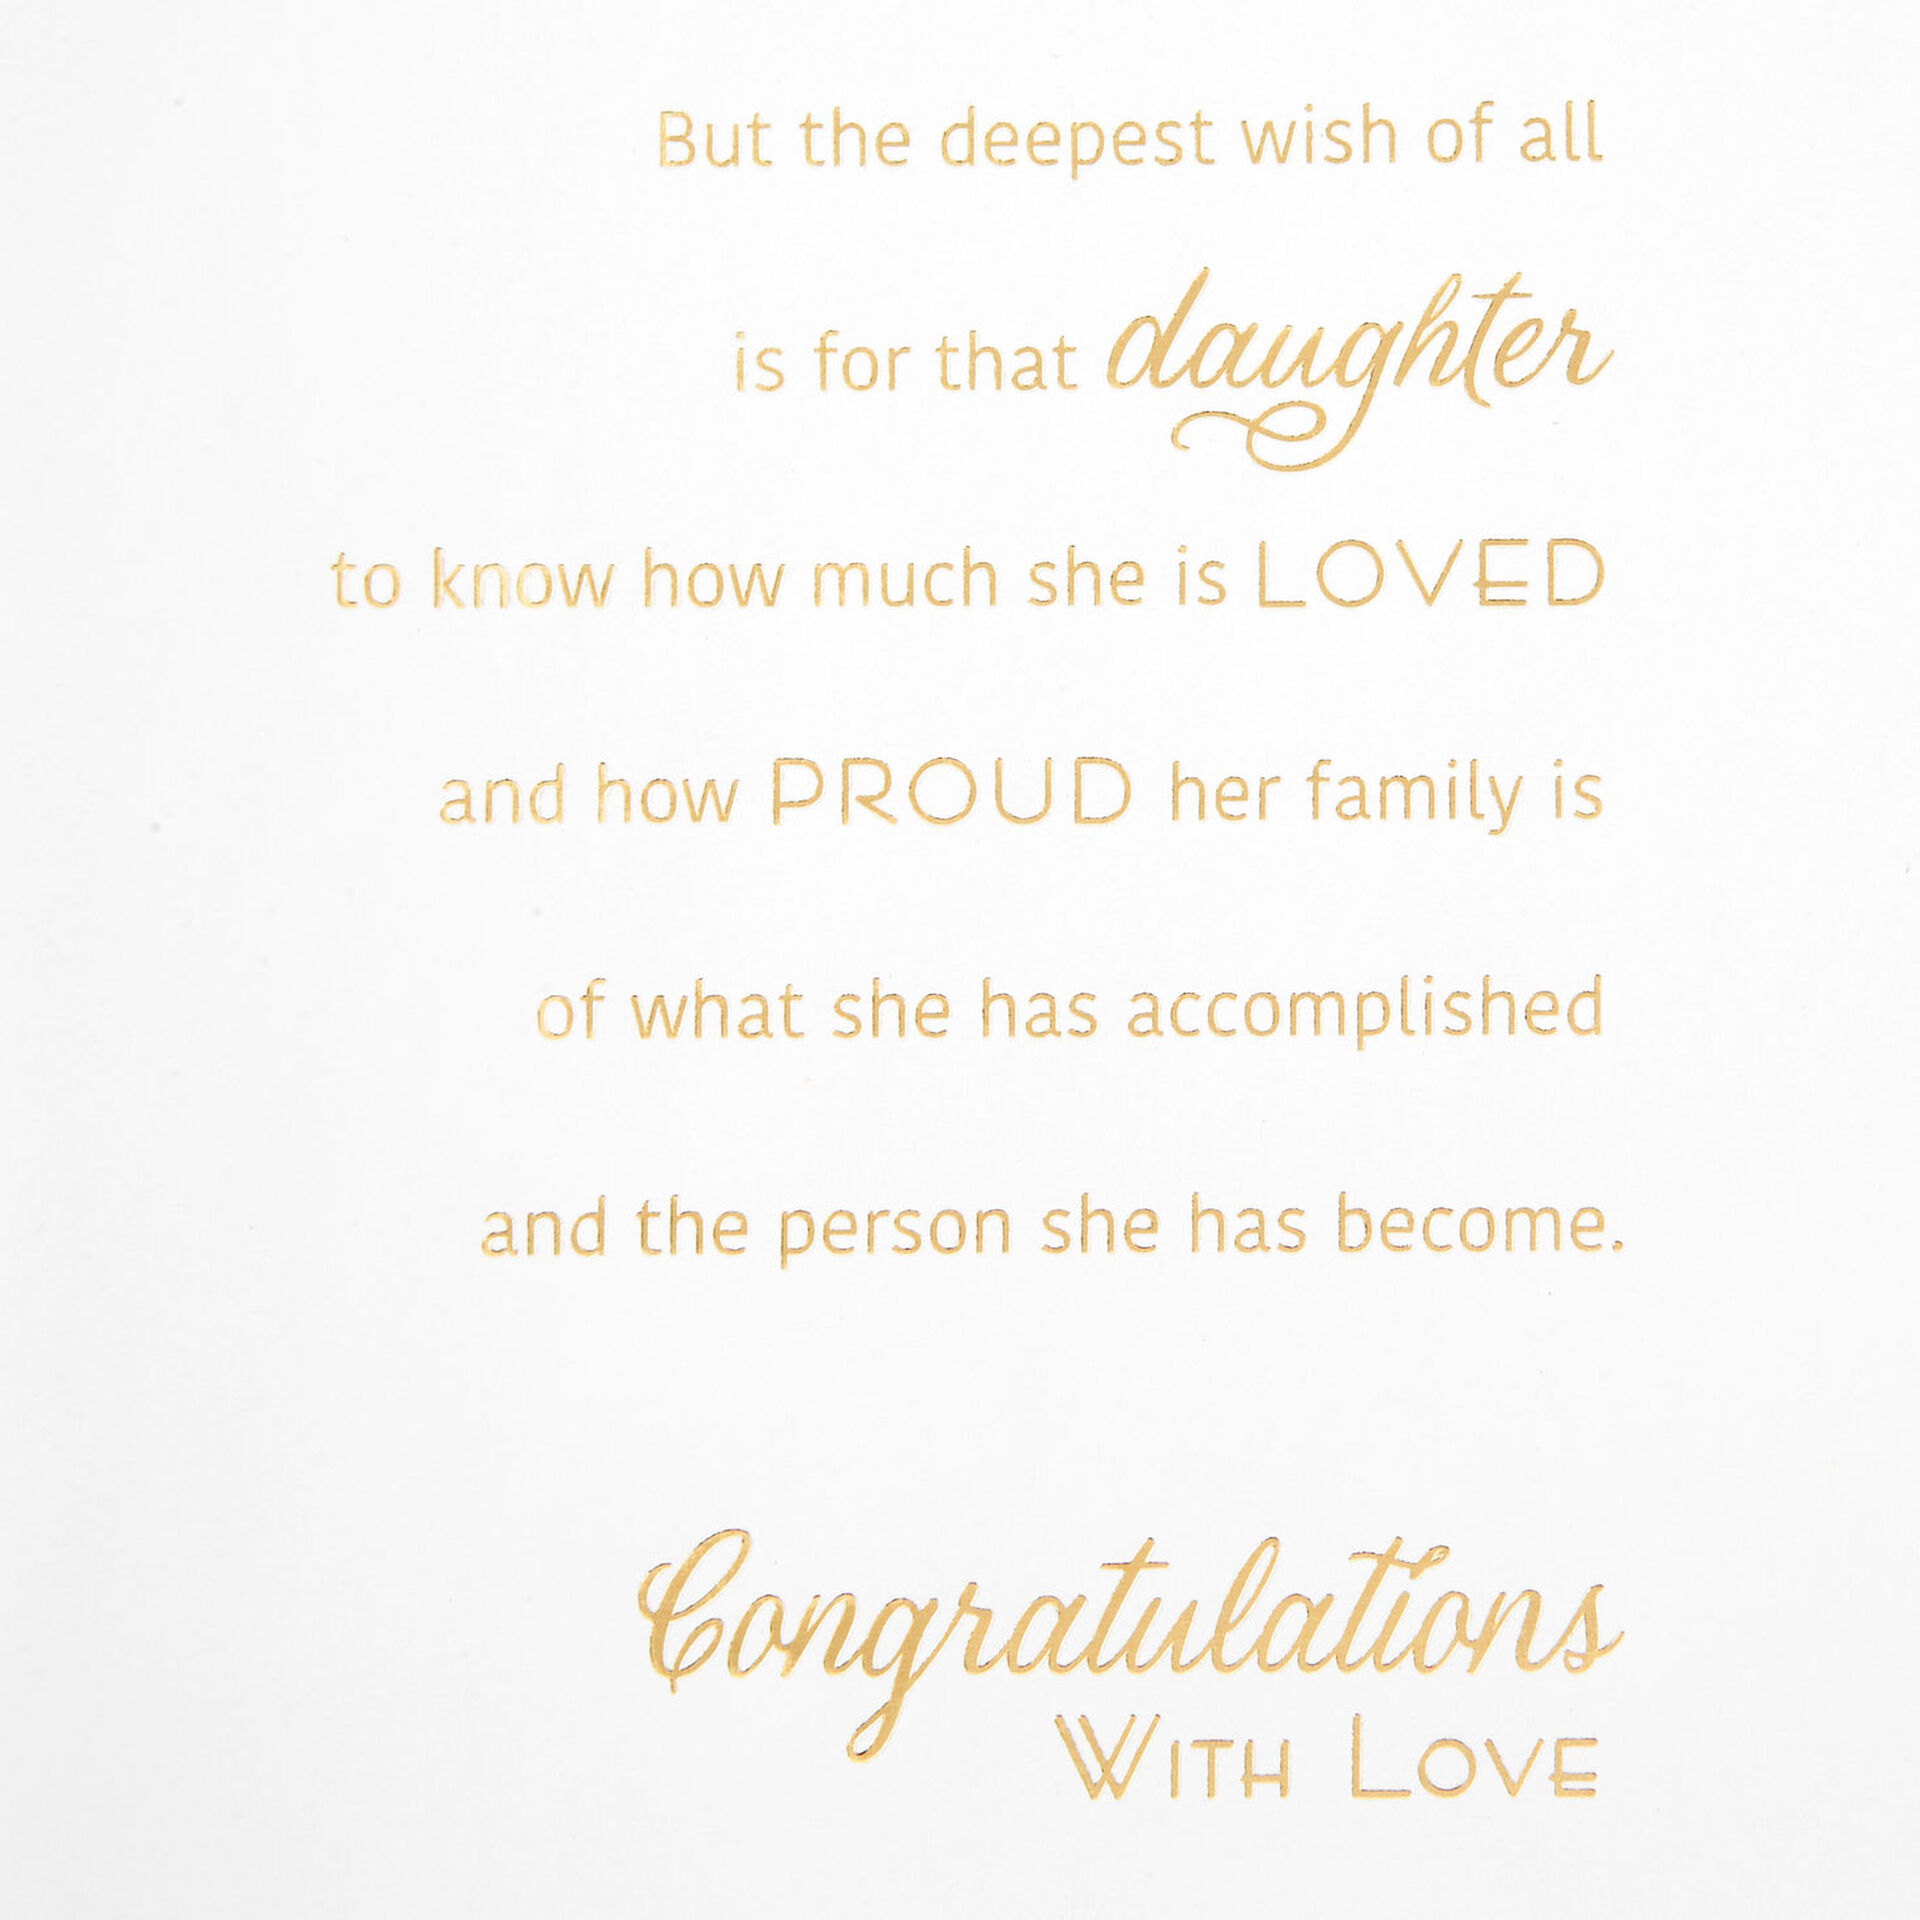 How Much You Are Loved Graduation Card for Daughter - Greeting Cards ...